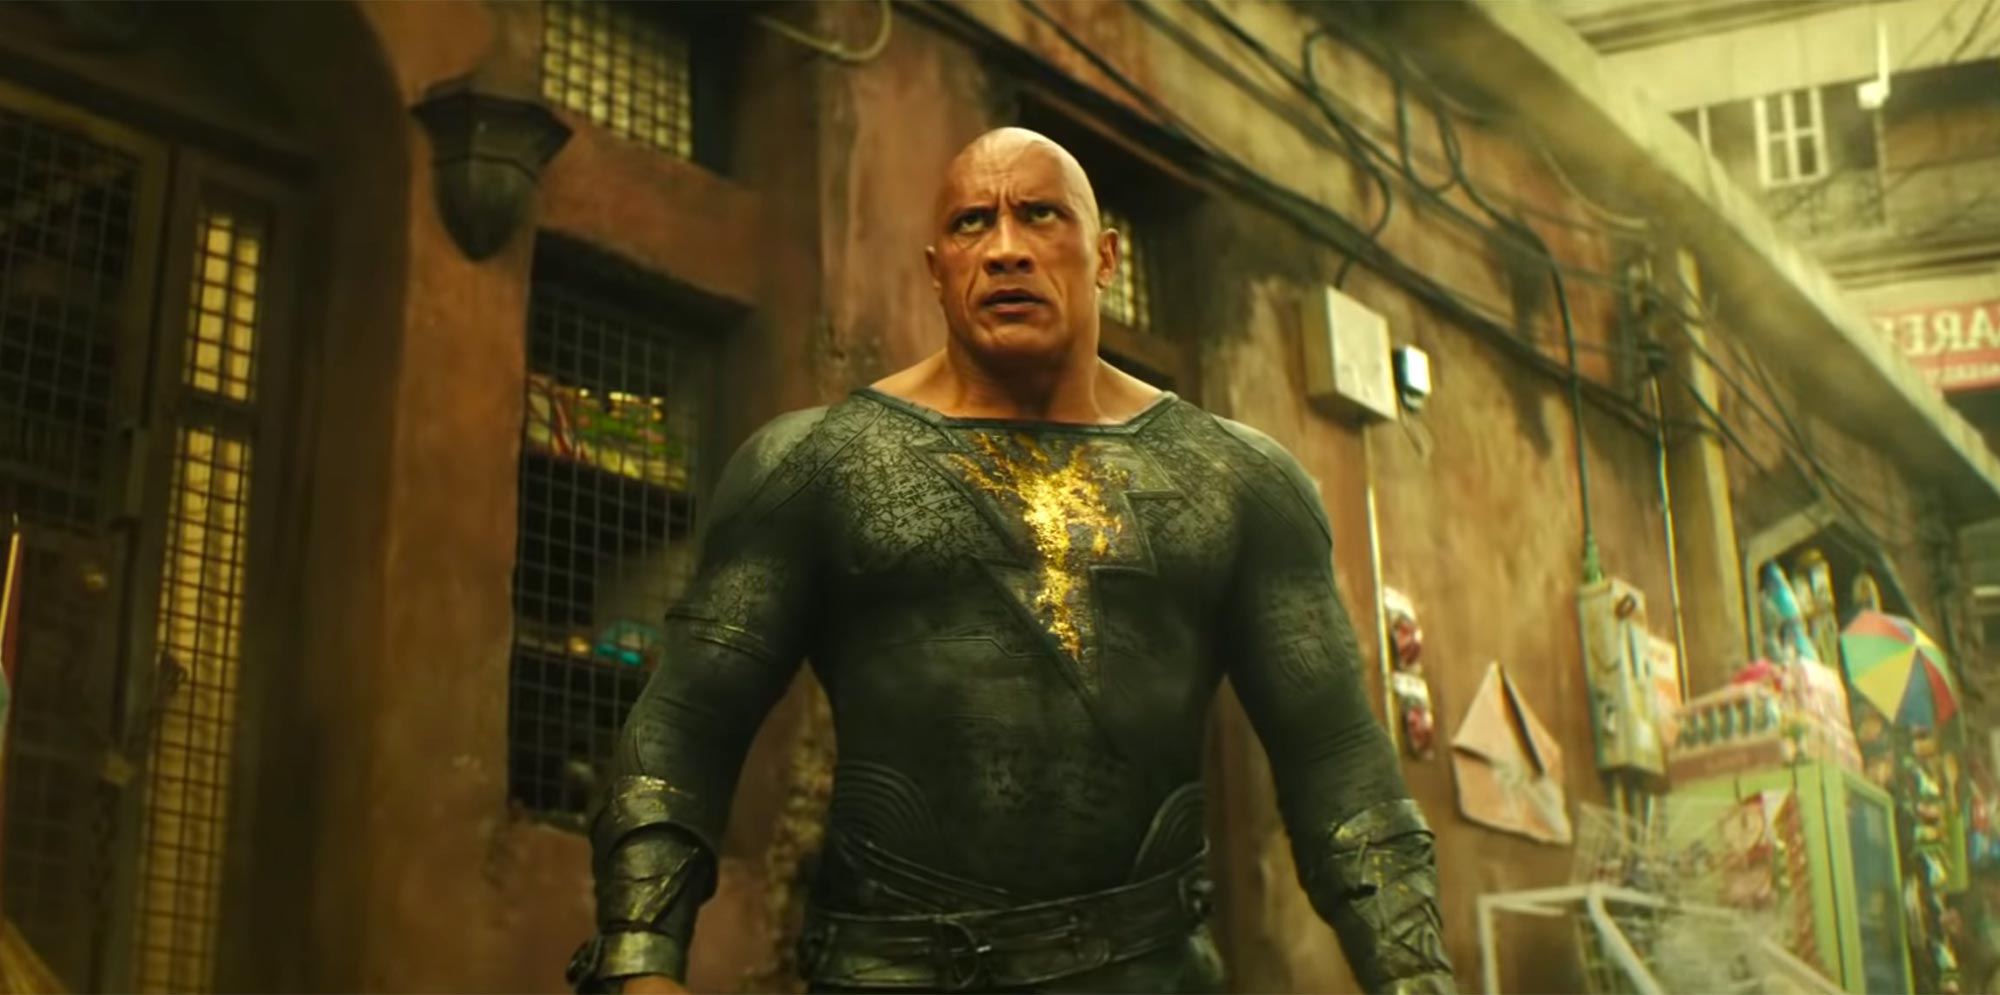 See the Rock's Black Adam, Pierce Brosnan's Doctor Fate in DC's 2022 preview